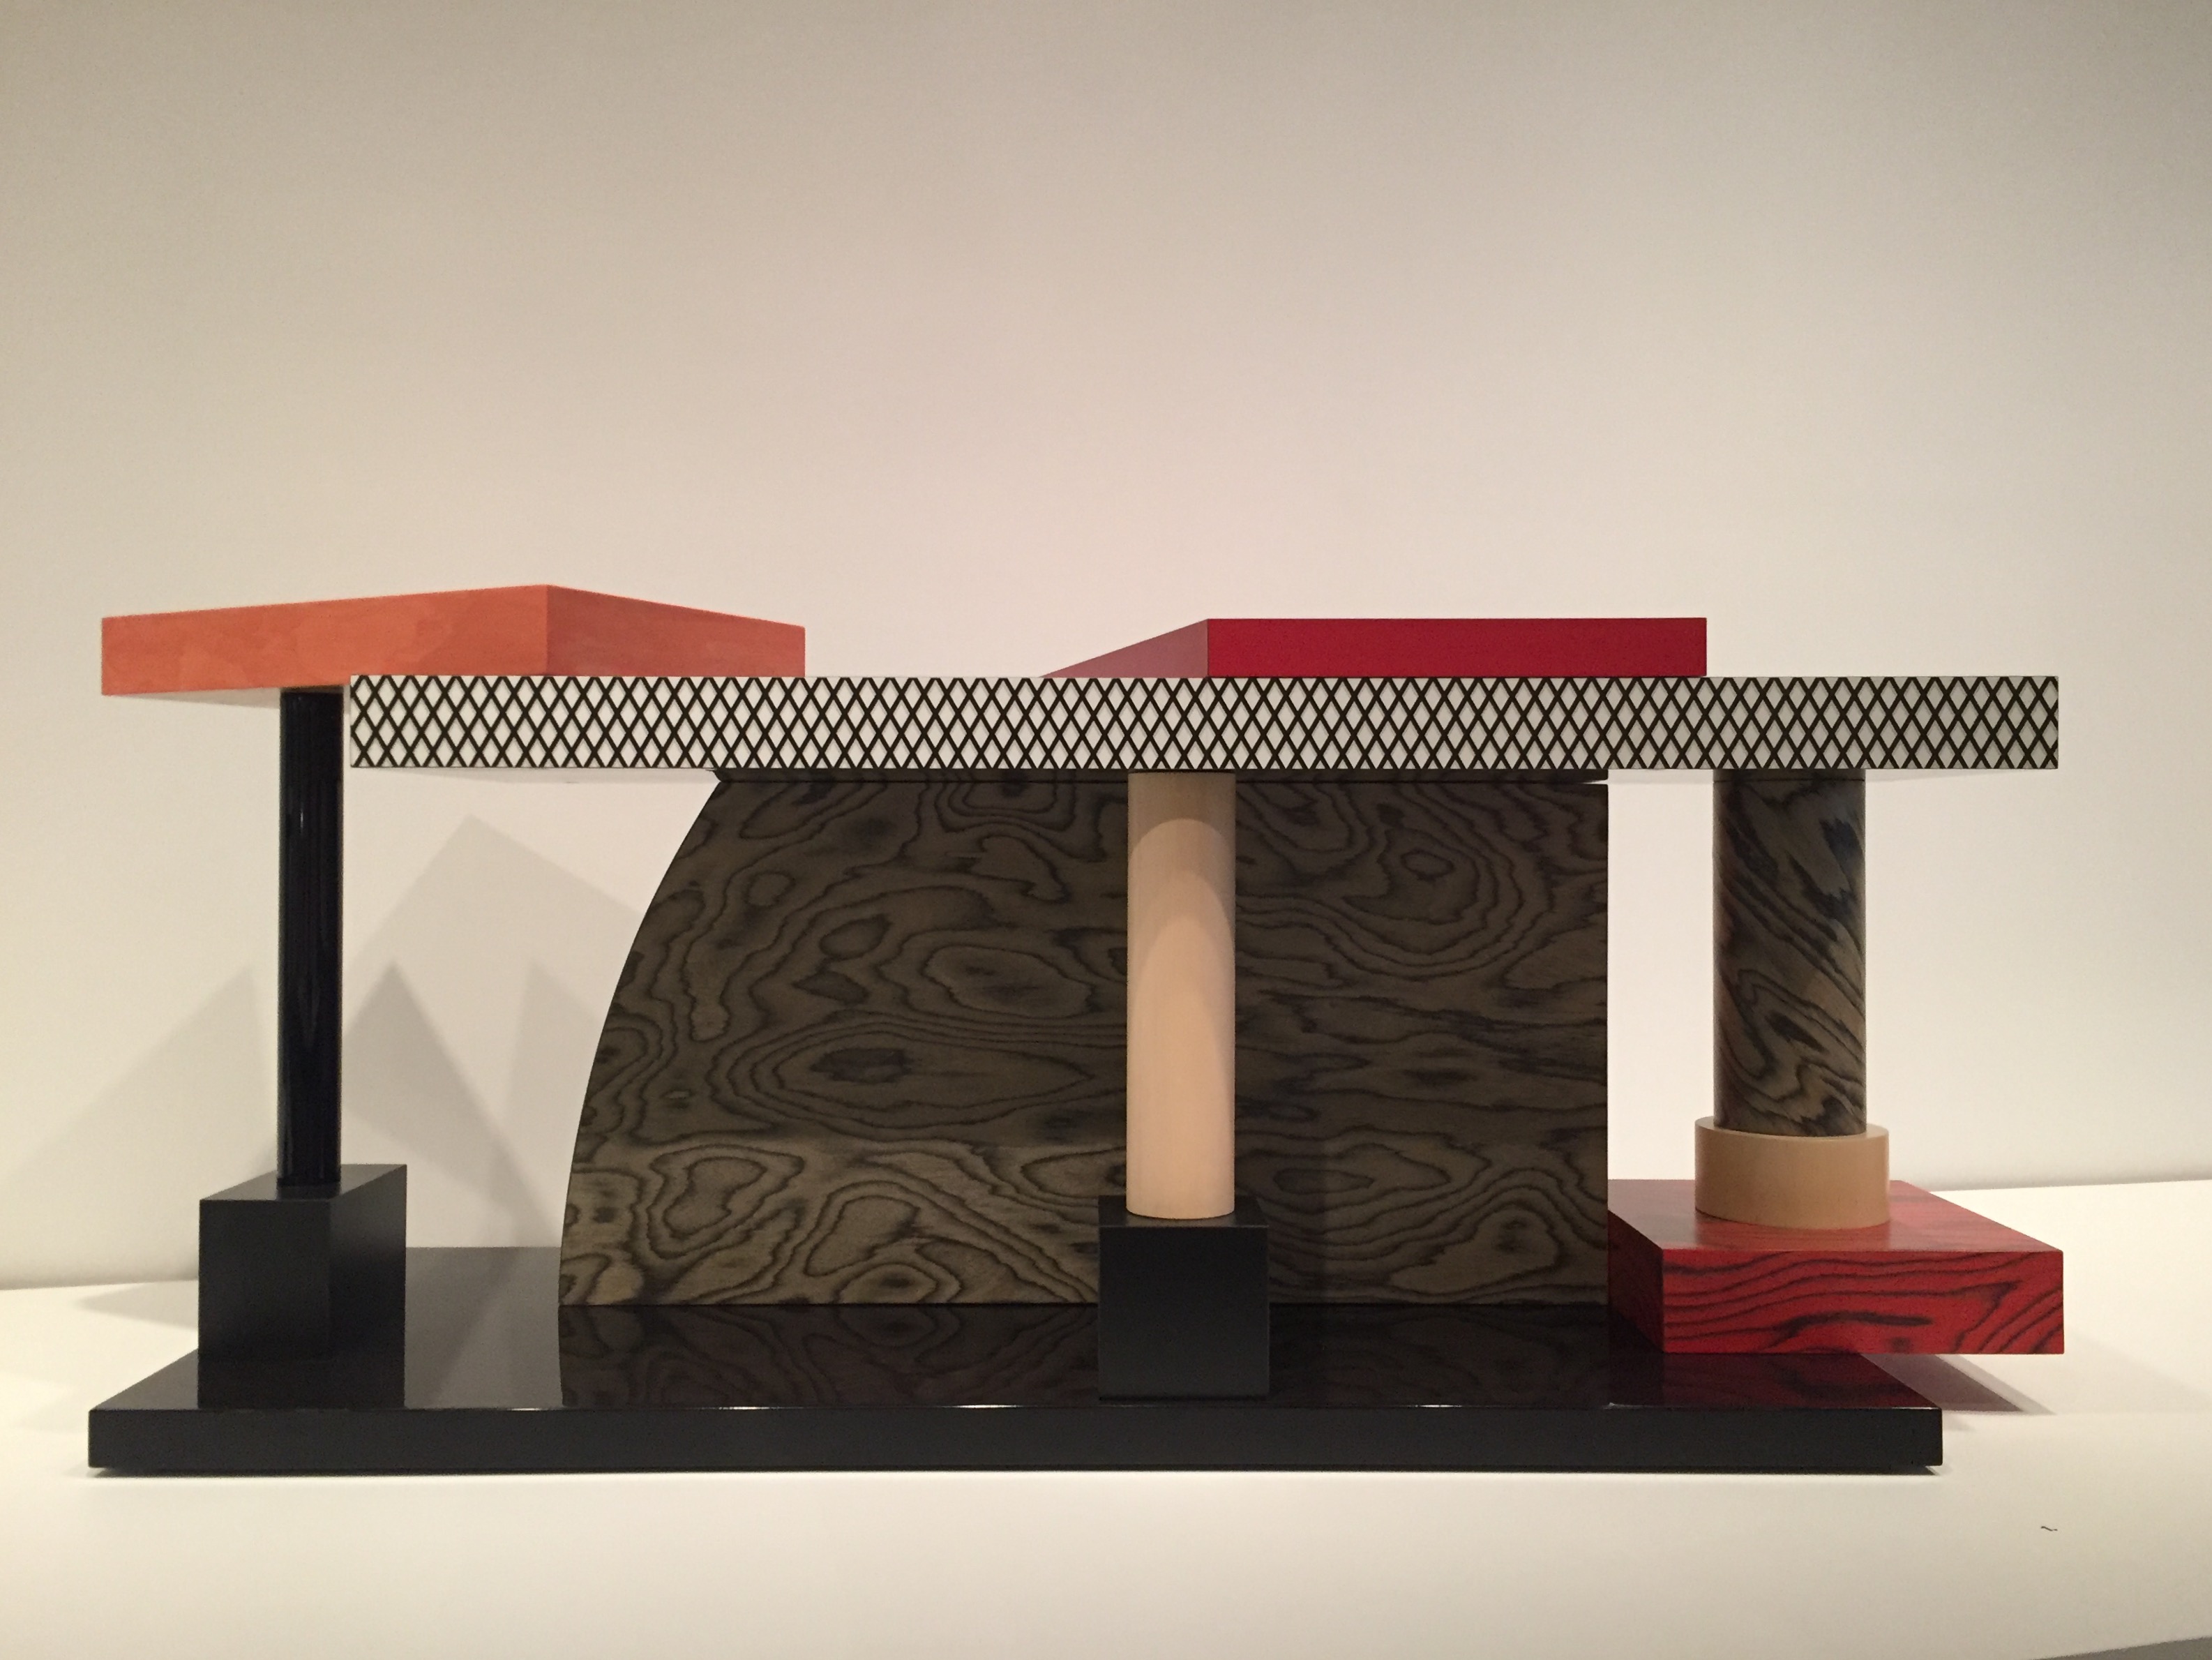 Turtle consol by Ettore Sottsass in the MET show Photo: Cristina Guadalupe Galván